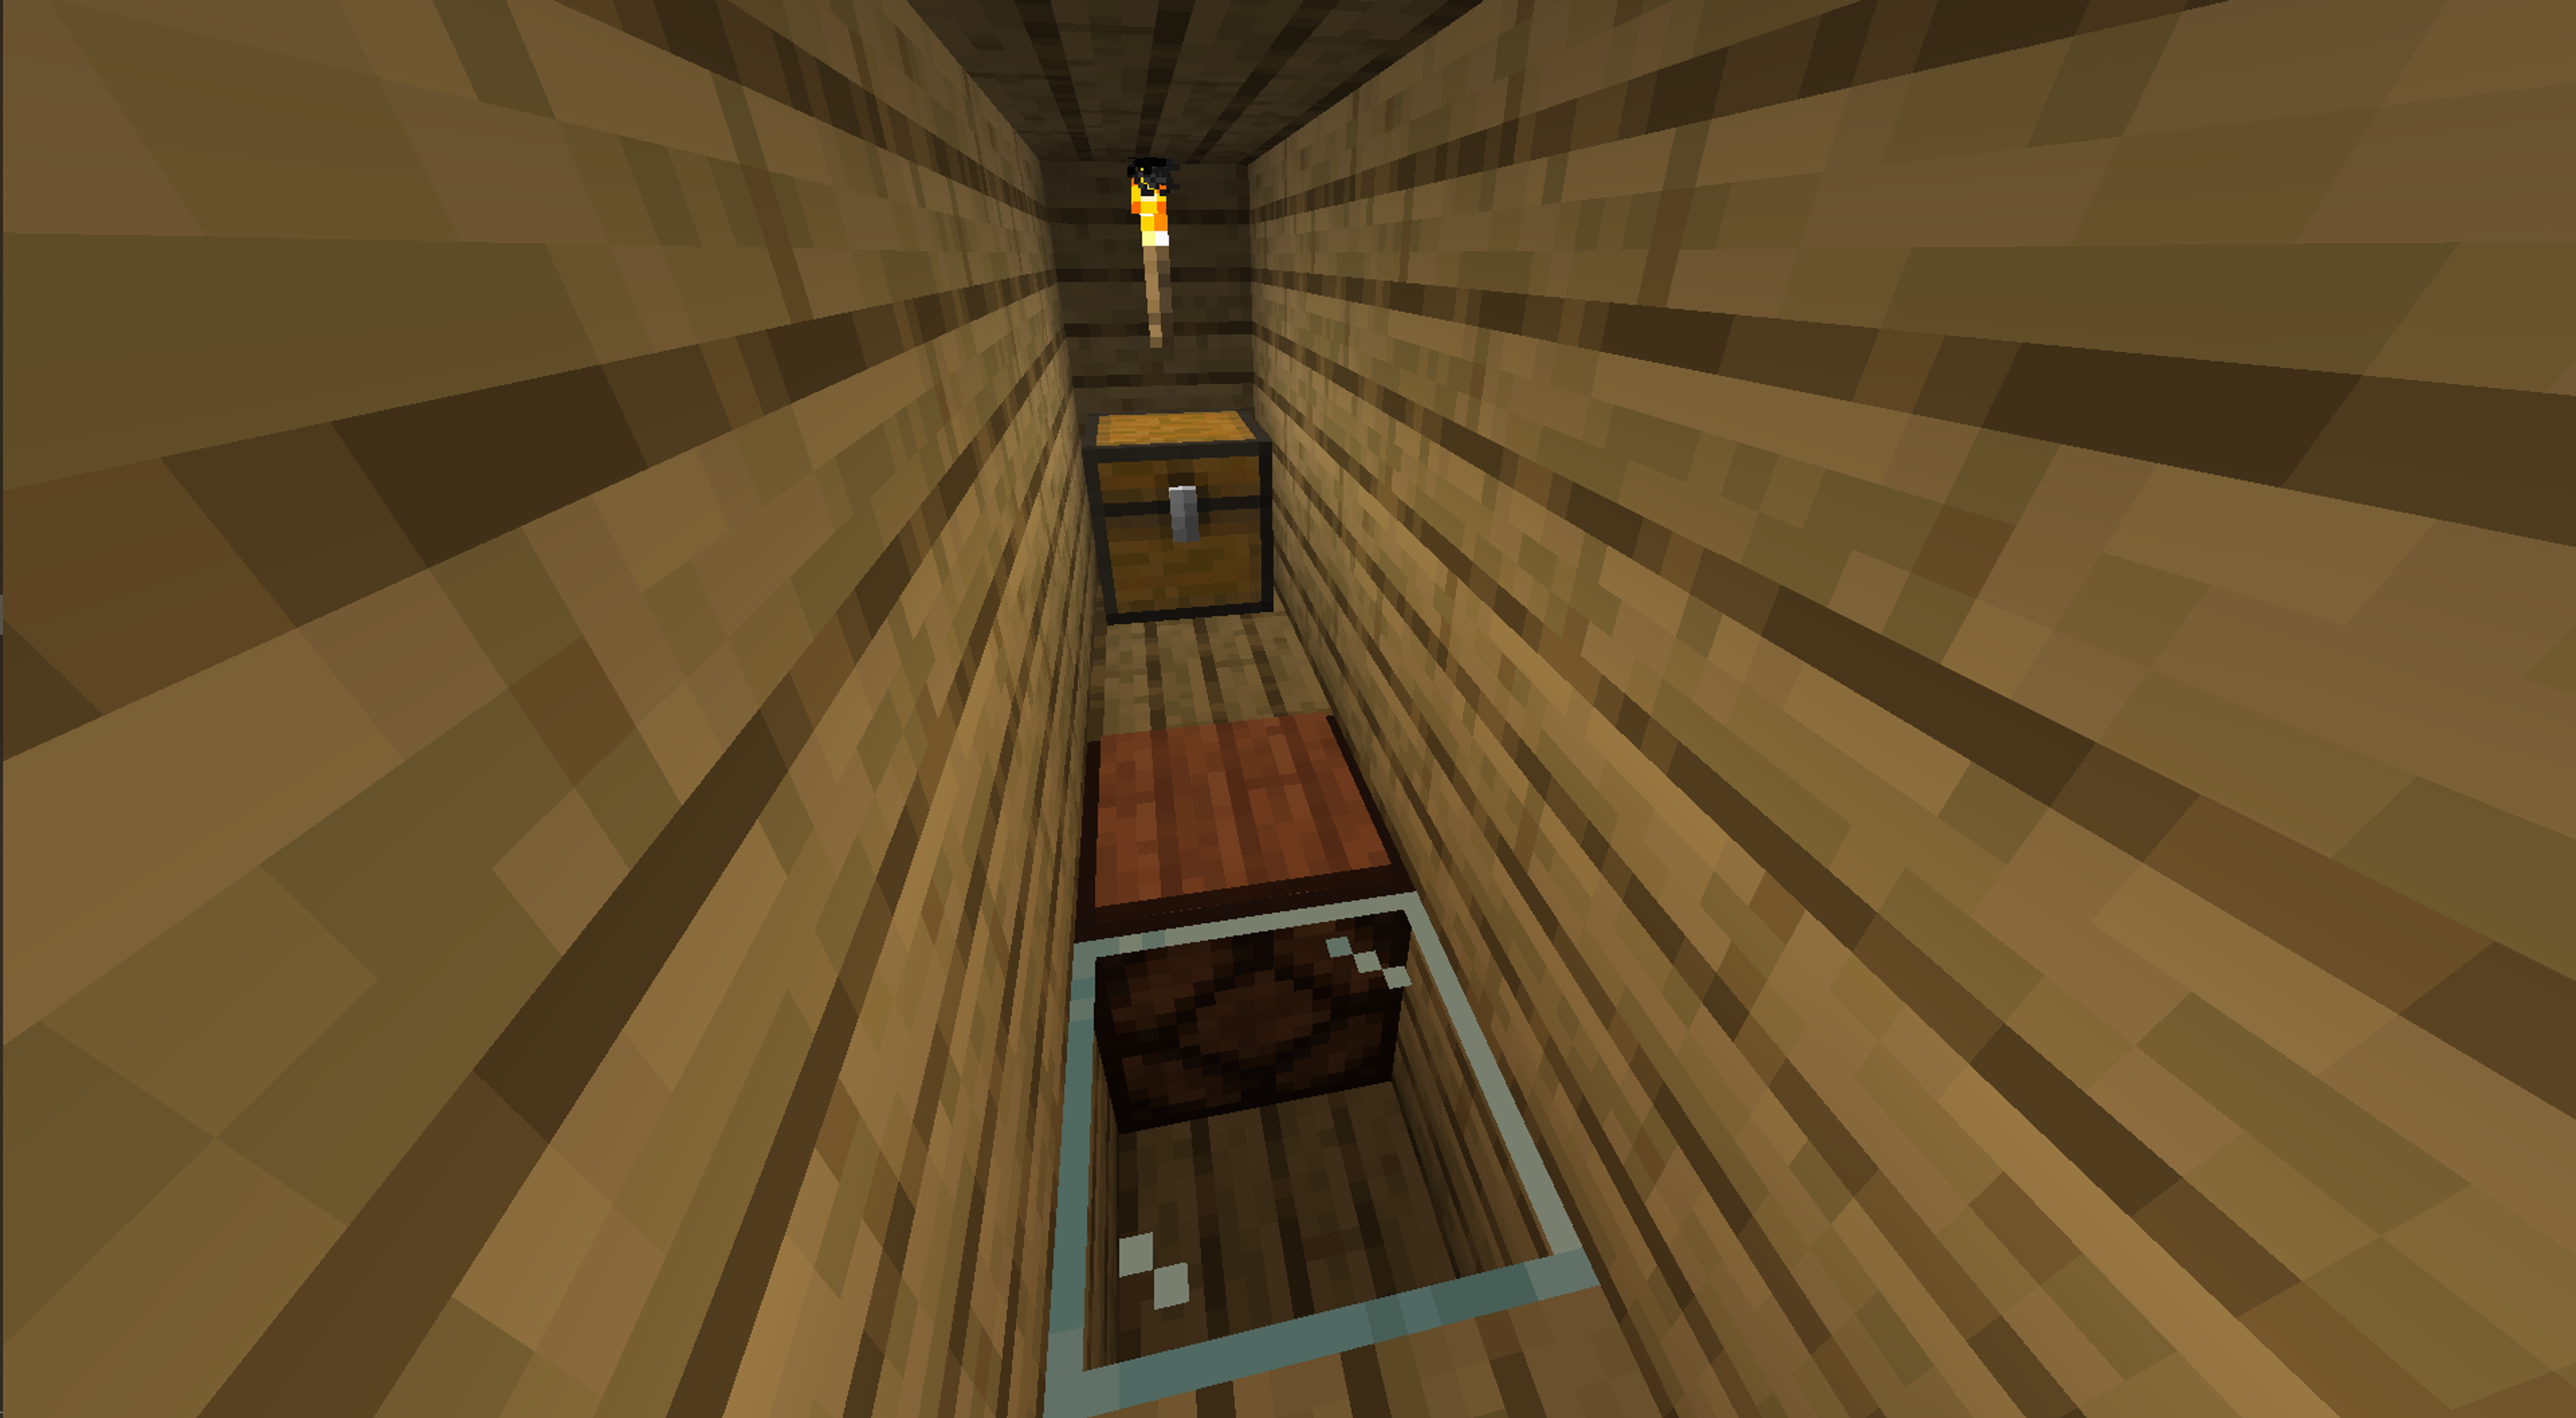 A pressure plate and a redstone lamp inside the concealed structure